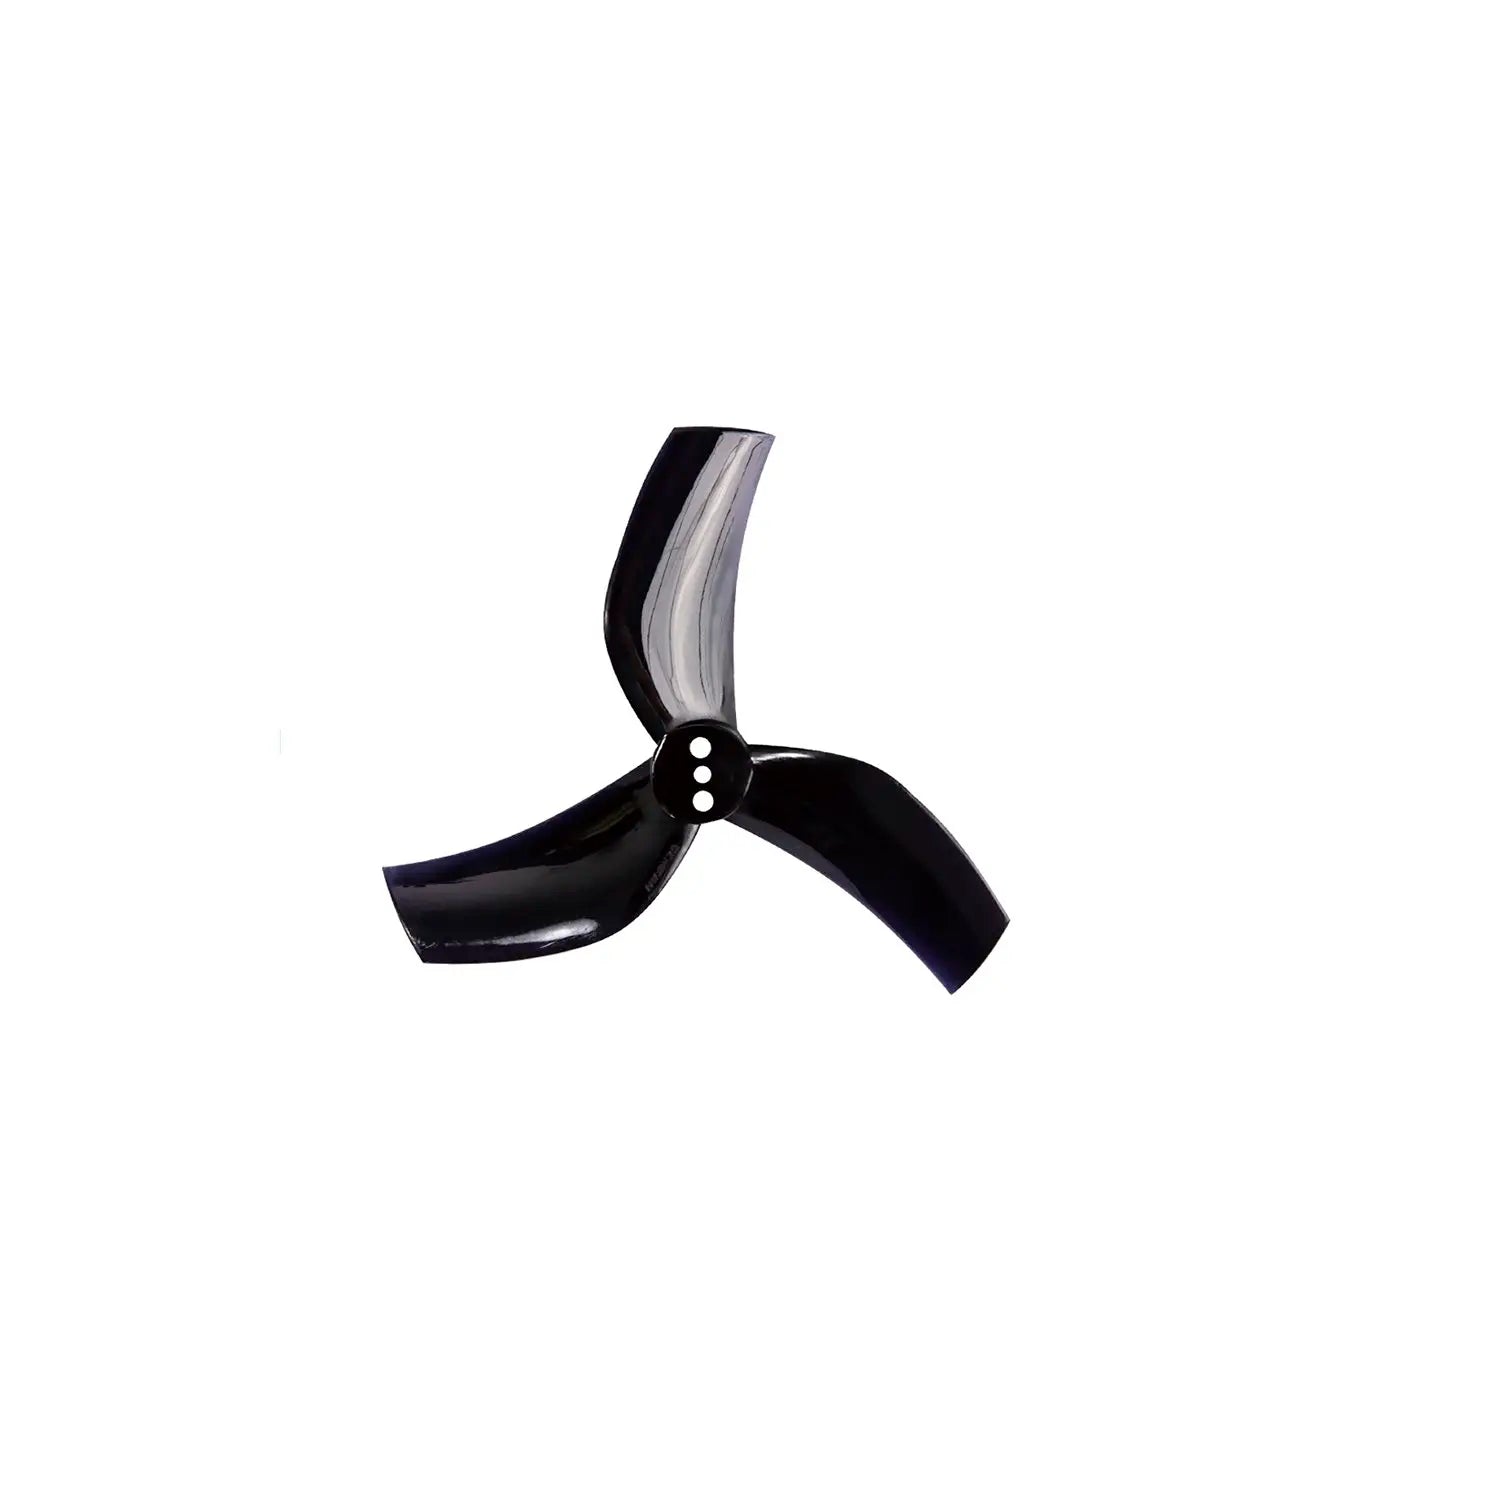 D63-3 2.5 inch CineWhoop Propeller, GEPRC Propellers are available in a variety of sizes and materials . they